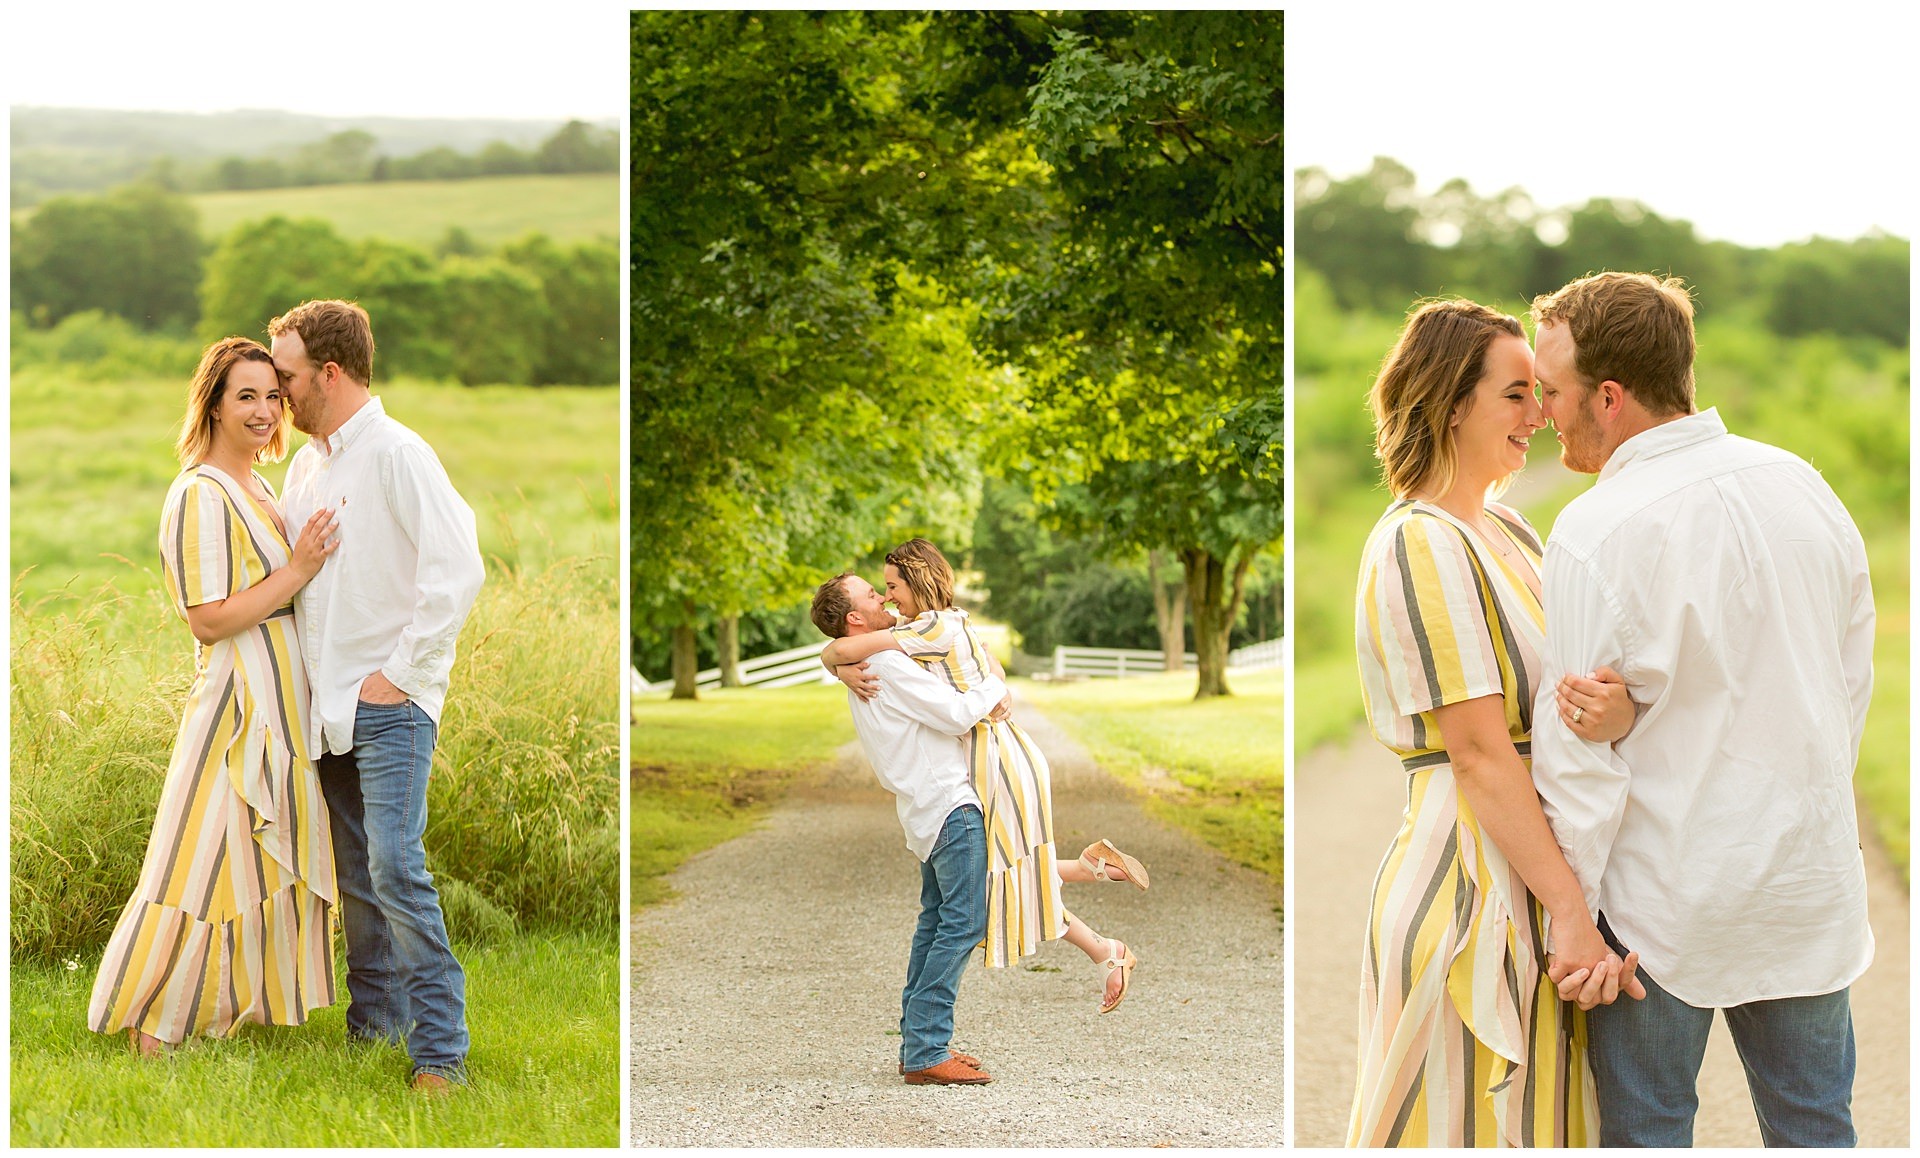 May engagement photos in the countryside at Shaker Village in Harrodsburg, KY